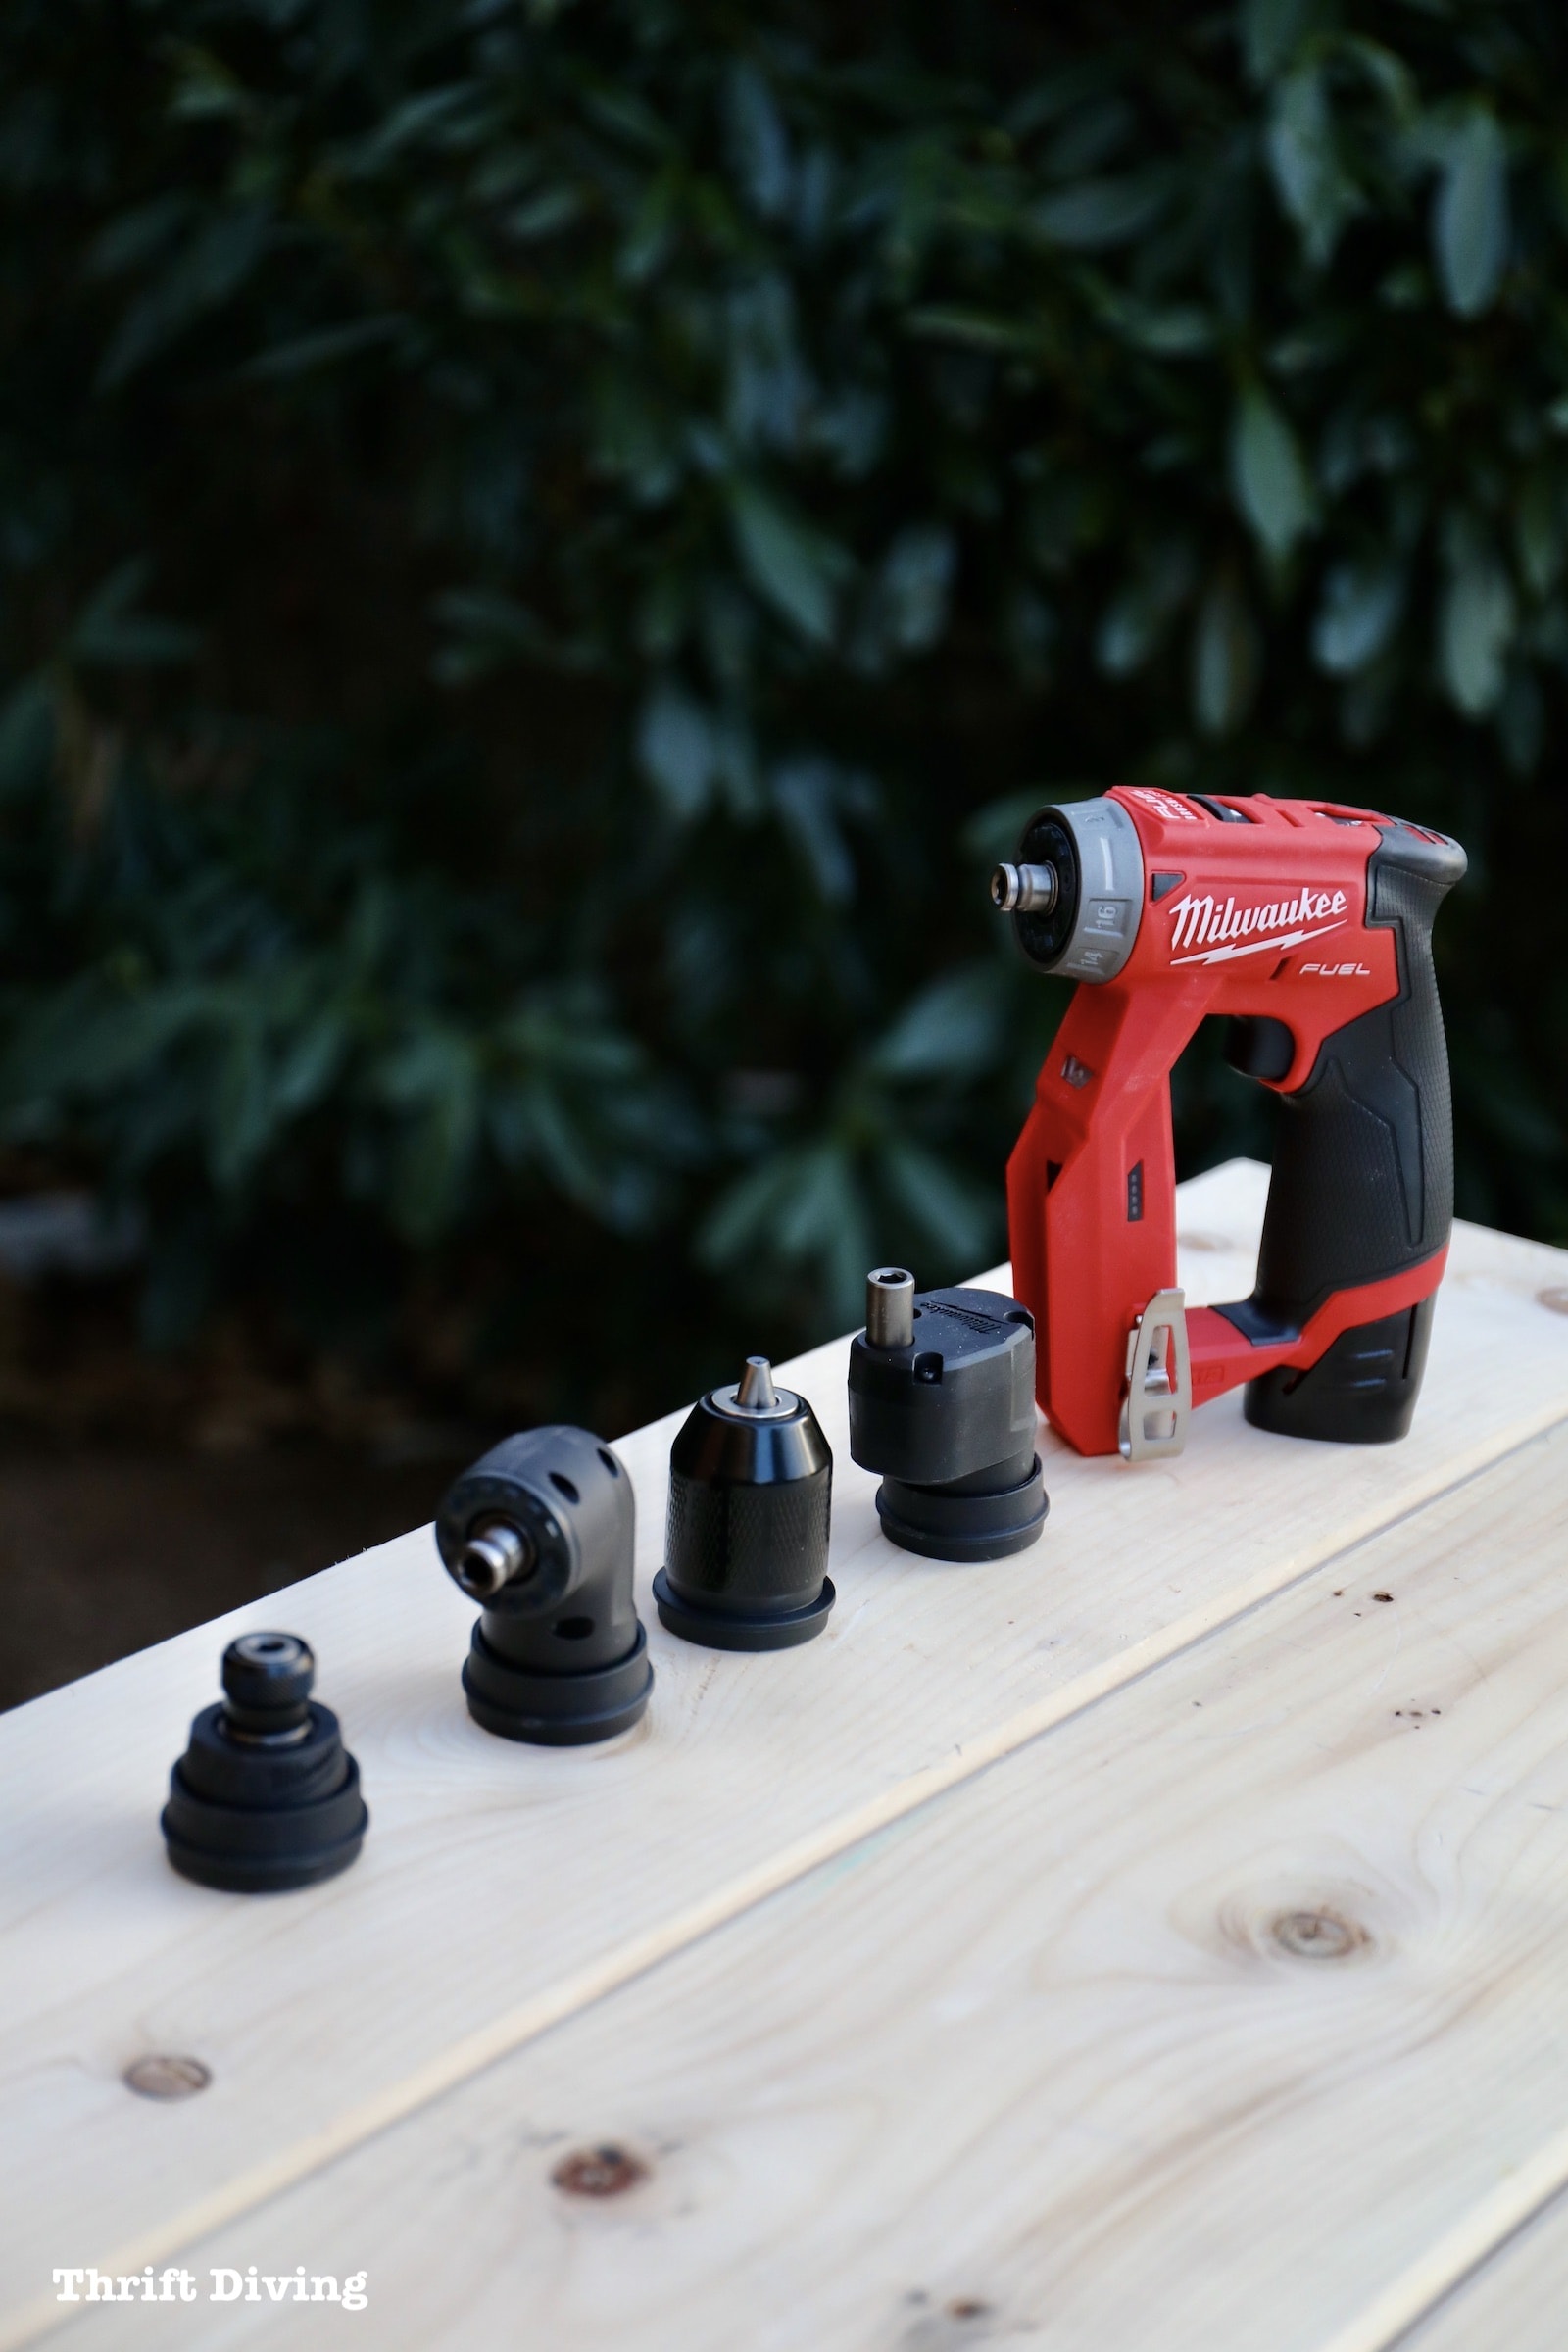 The Best Power Tool For Drilling and Driving in Tight Spaces